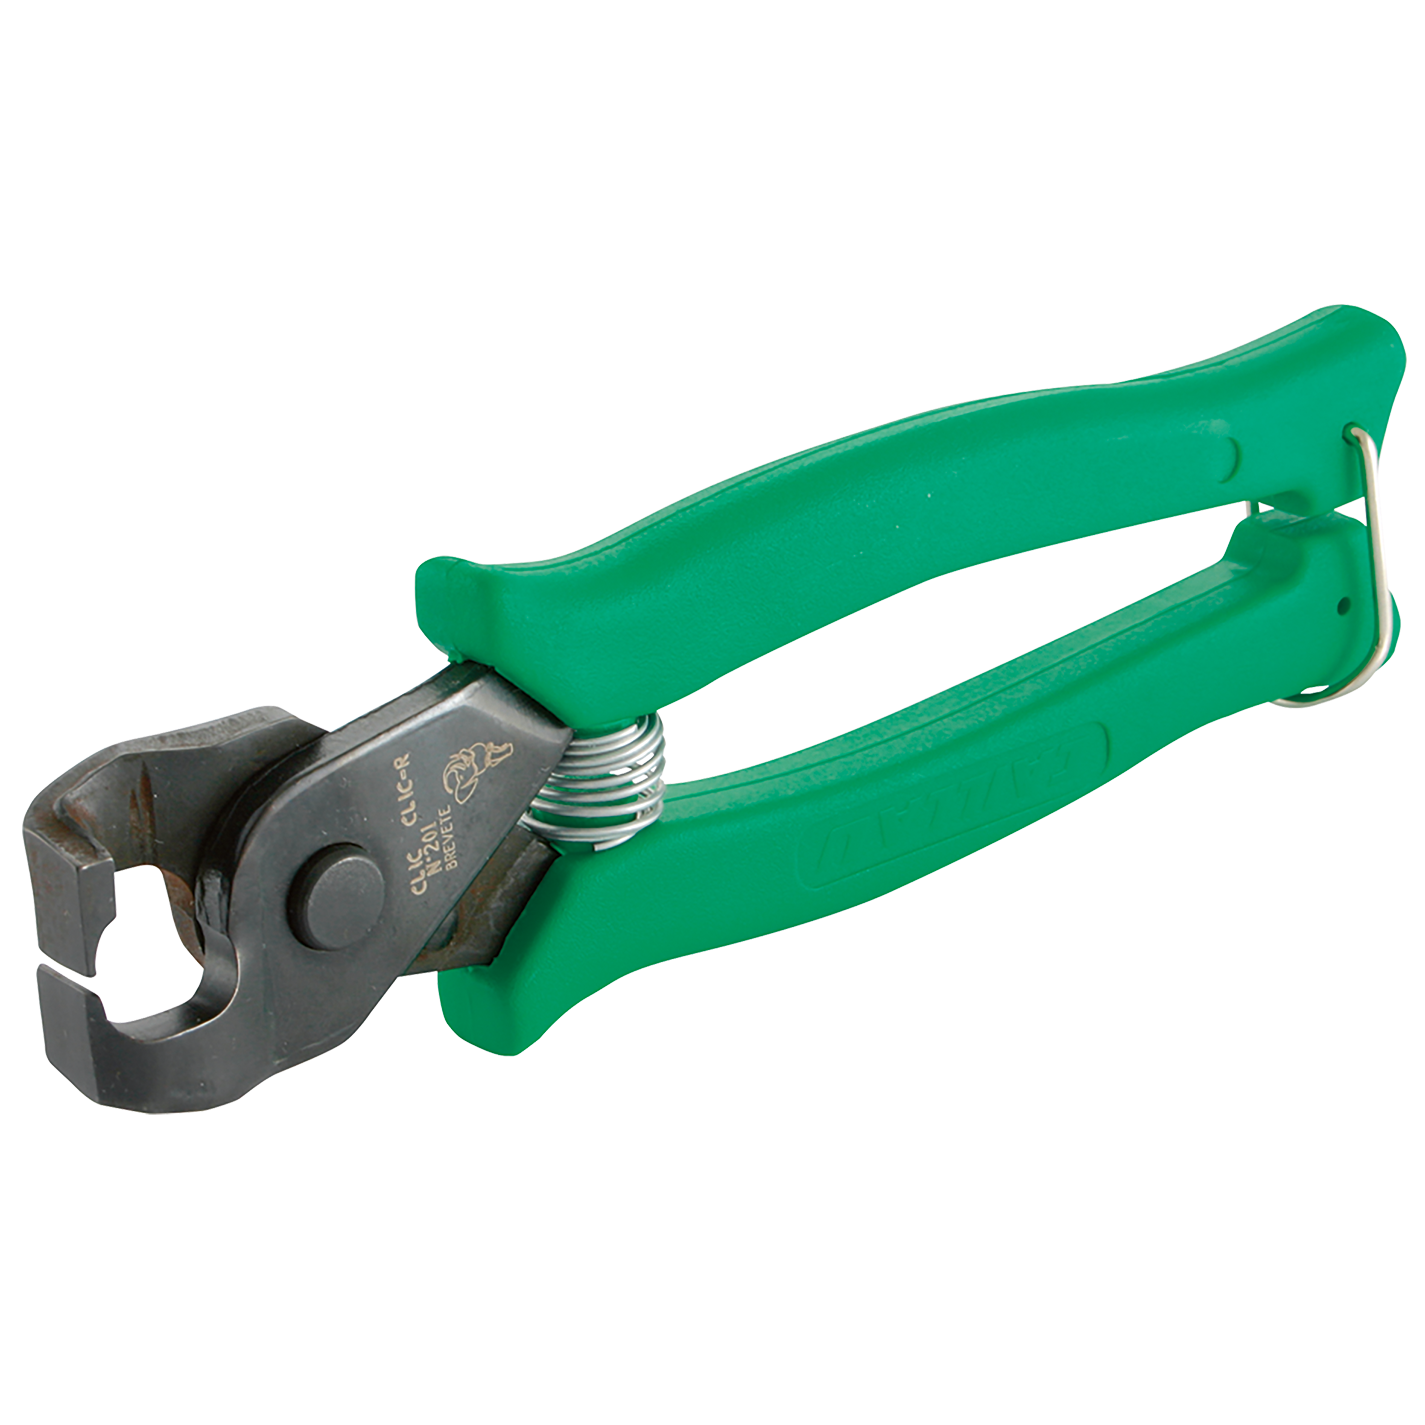  Clip Plier/Connecting Tool